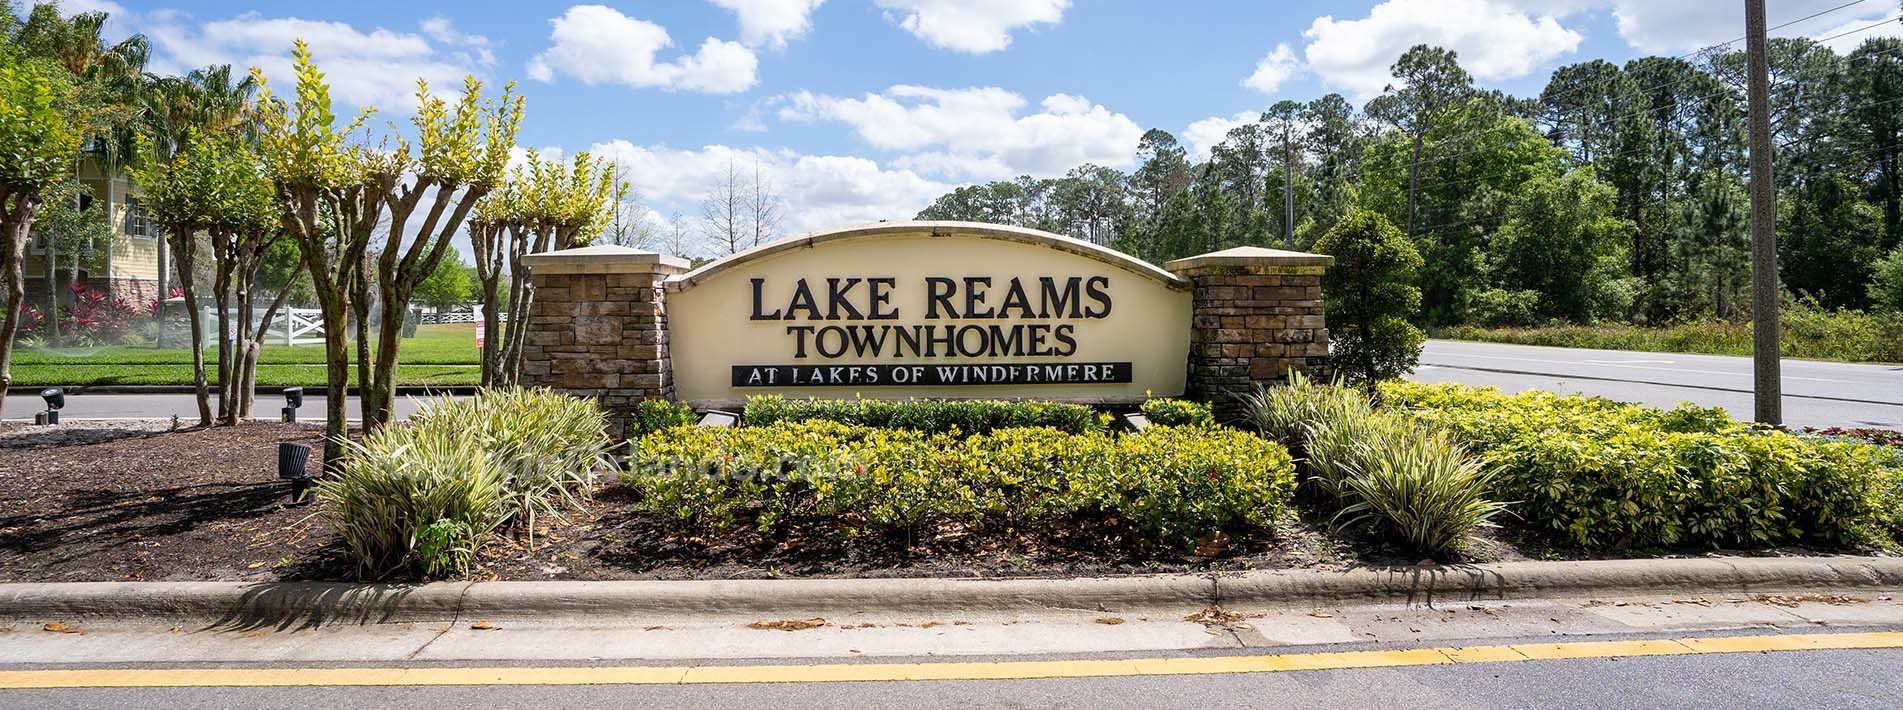 Lake Reams Townhomes Windermere Real Estate